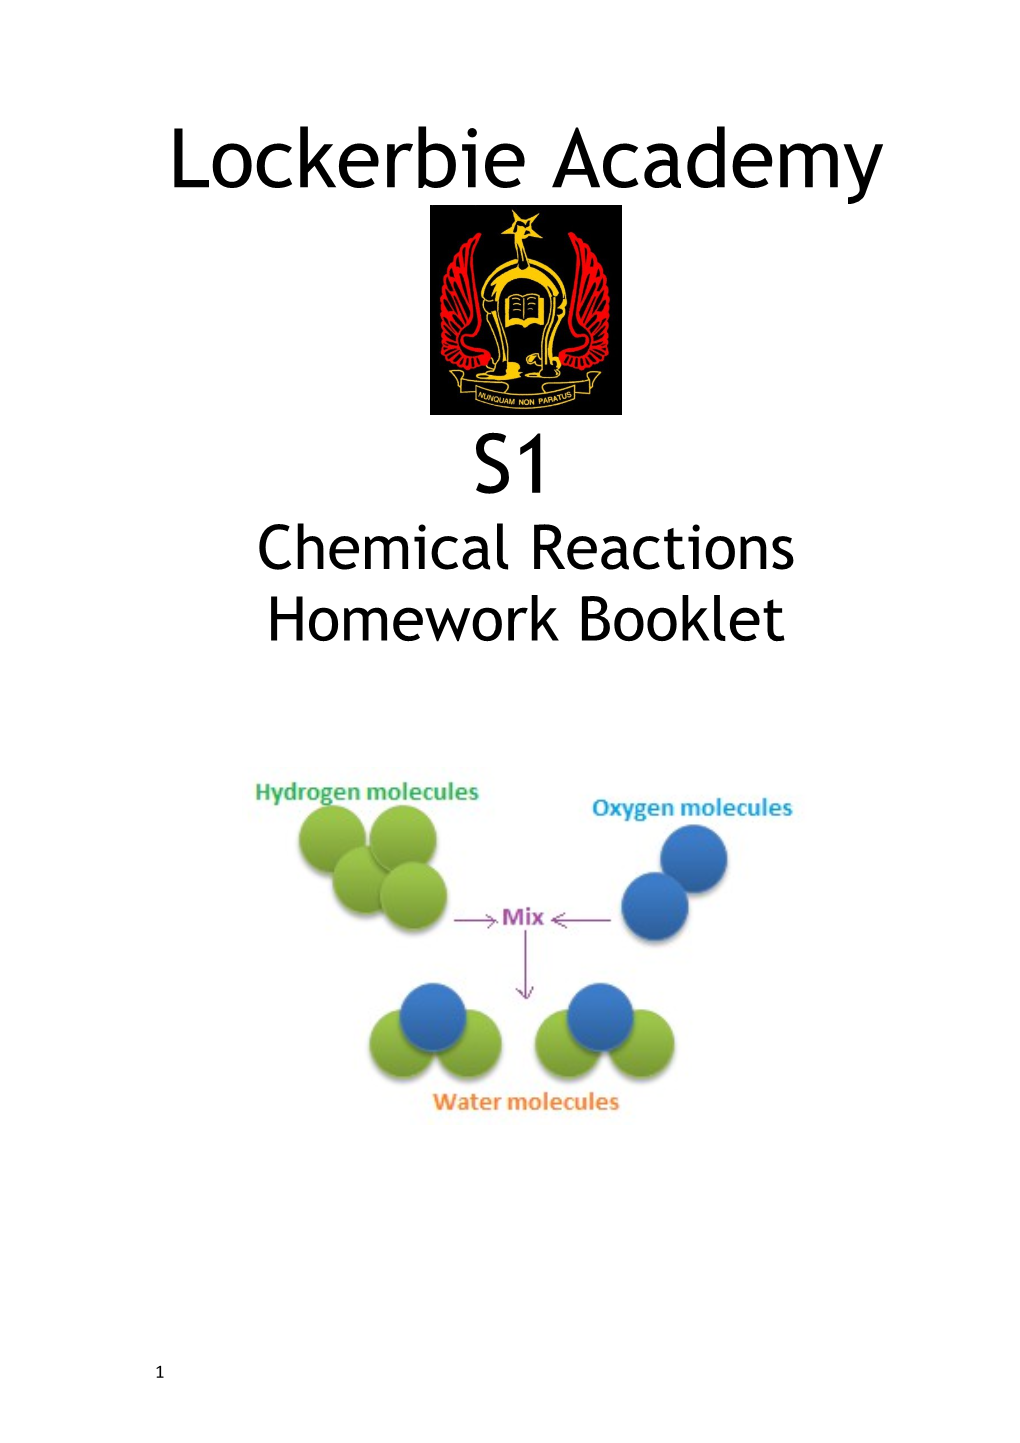 Homework 1 Chemical Reactions and Reaction Rates